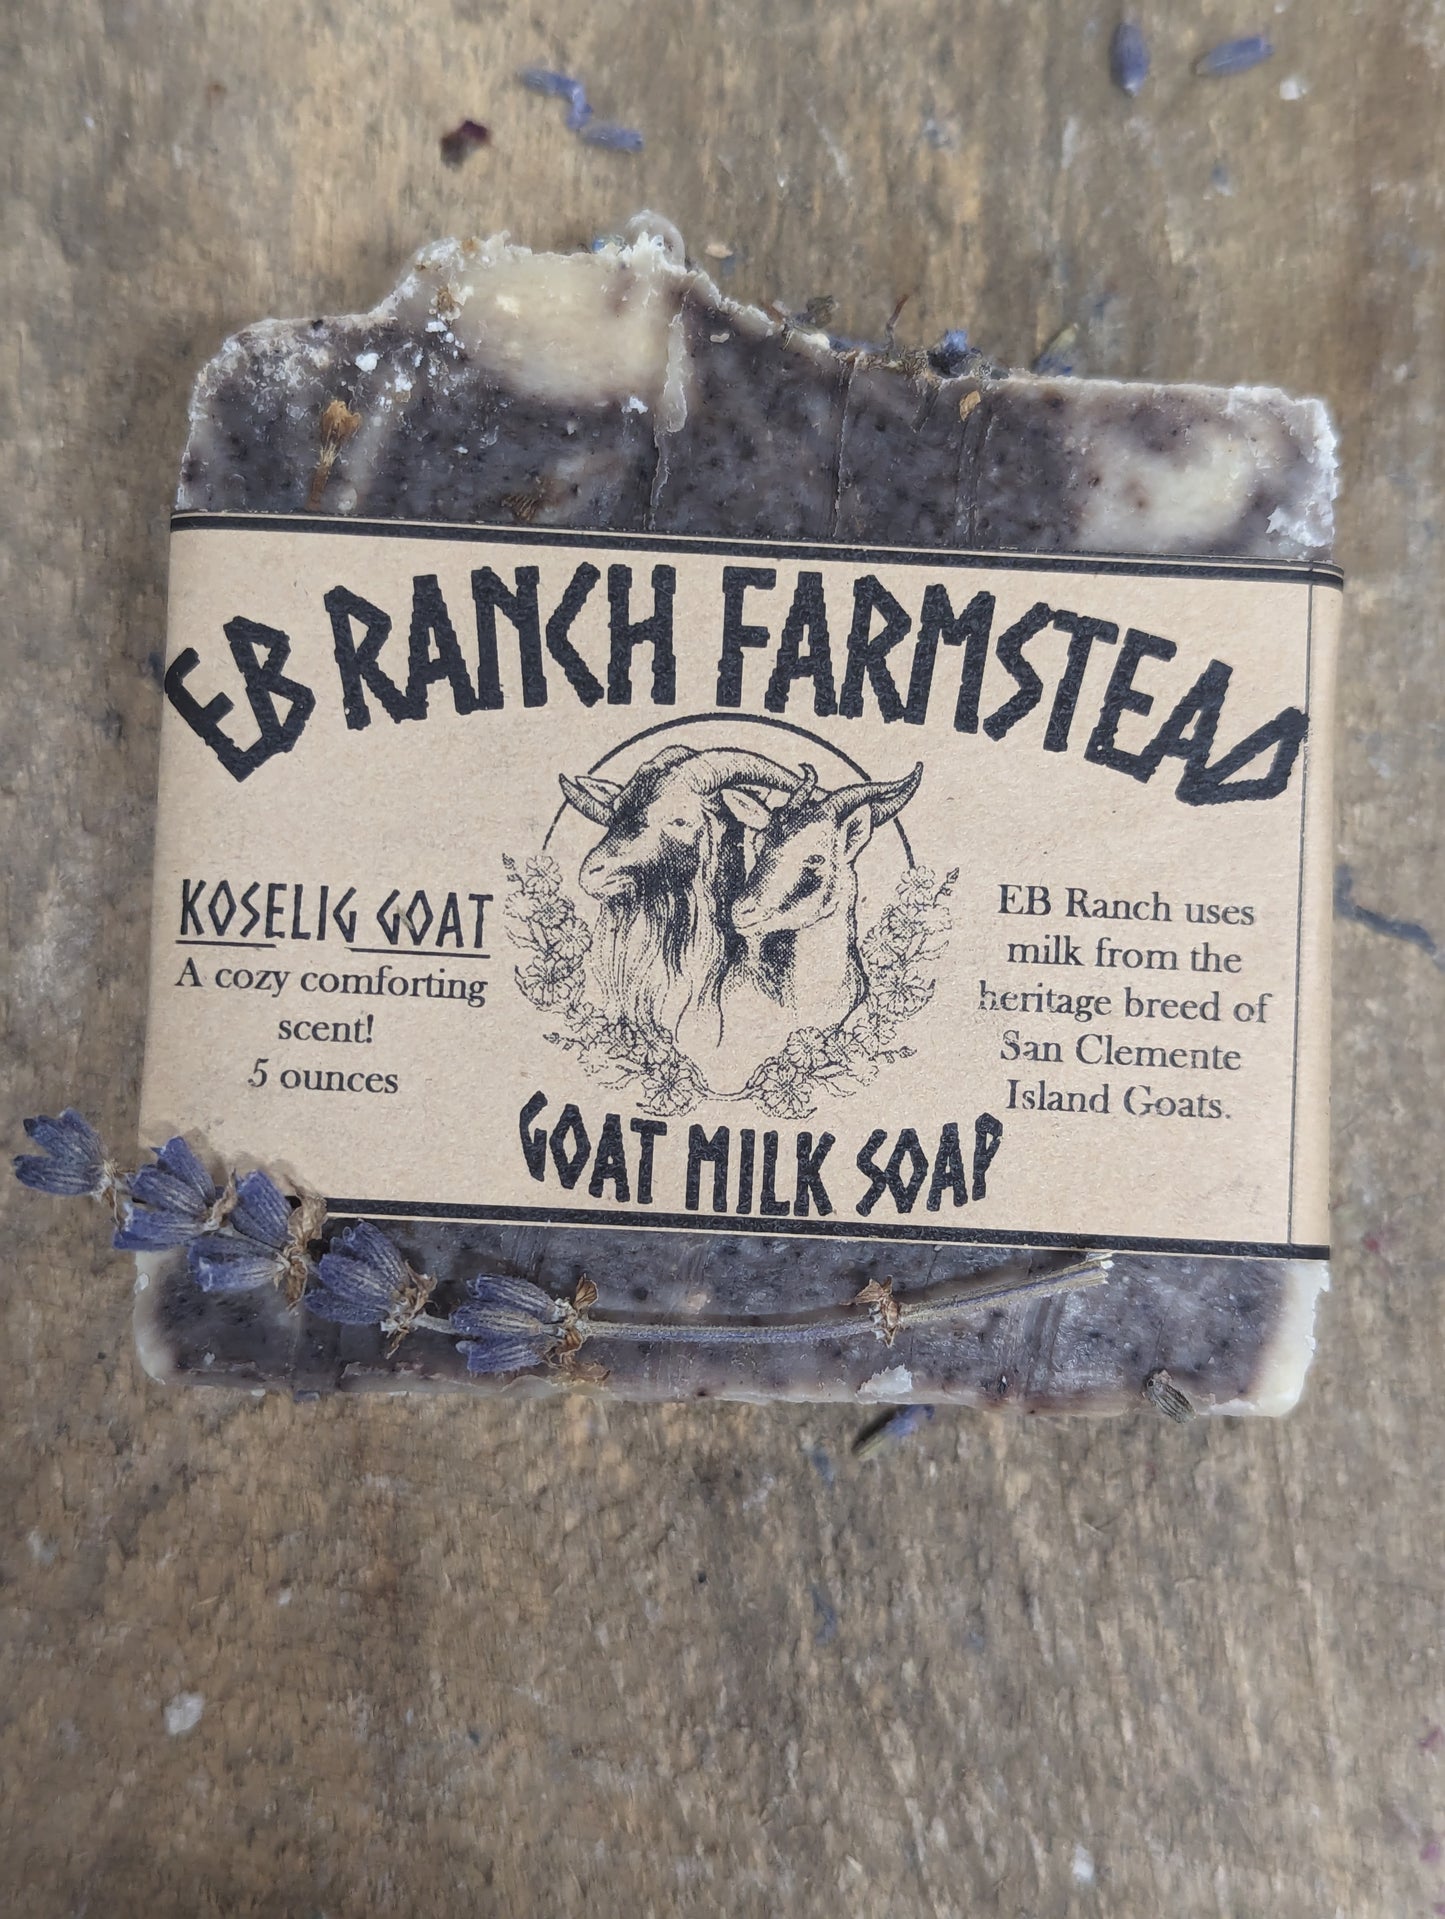 Bar of Wild Haven Farm's Koselig goat milk soap made with San Clemente Island goat milk